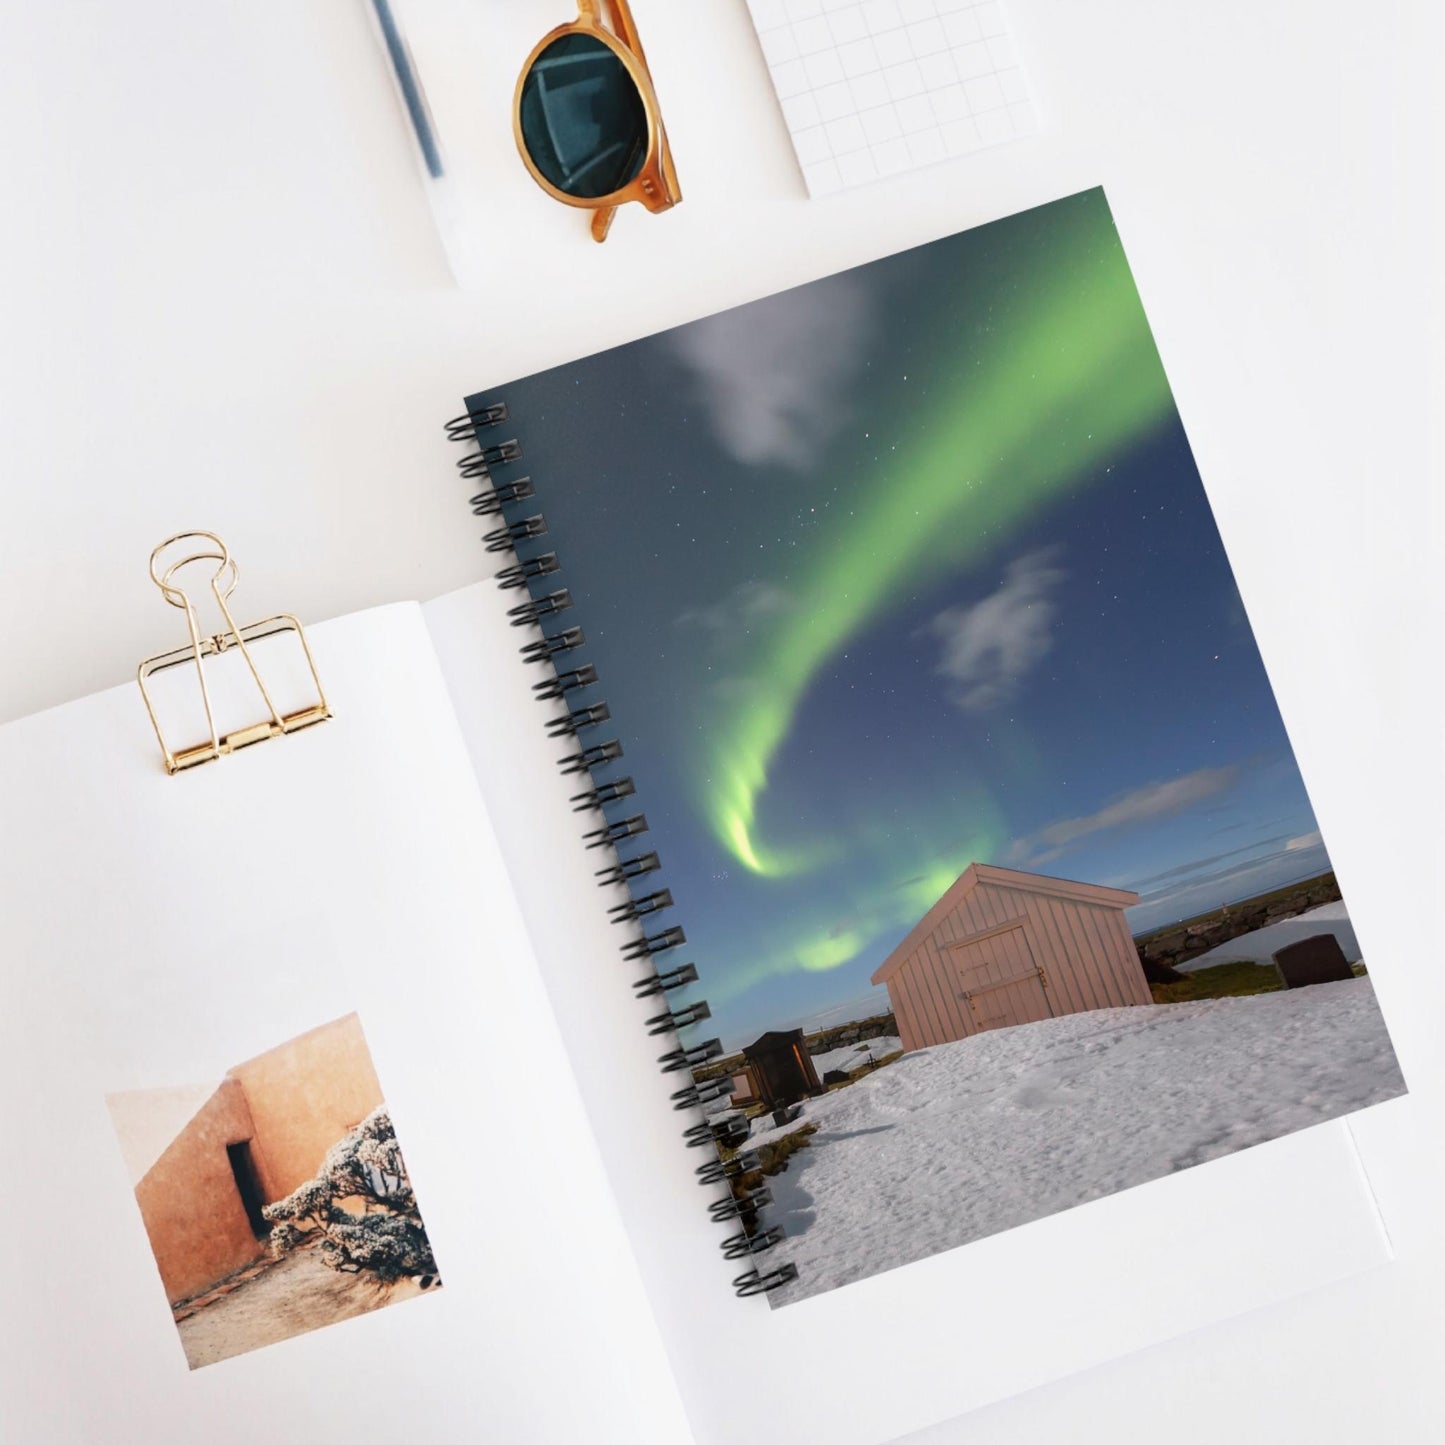 Unique Aurora Borealis Spiral Notebook Ruled Line - Personalized Northern Light View - Stationary Accessories - Perfect Aurora Lovers Gift 19